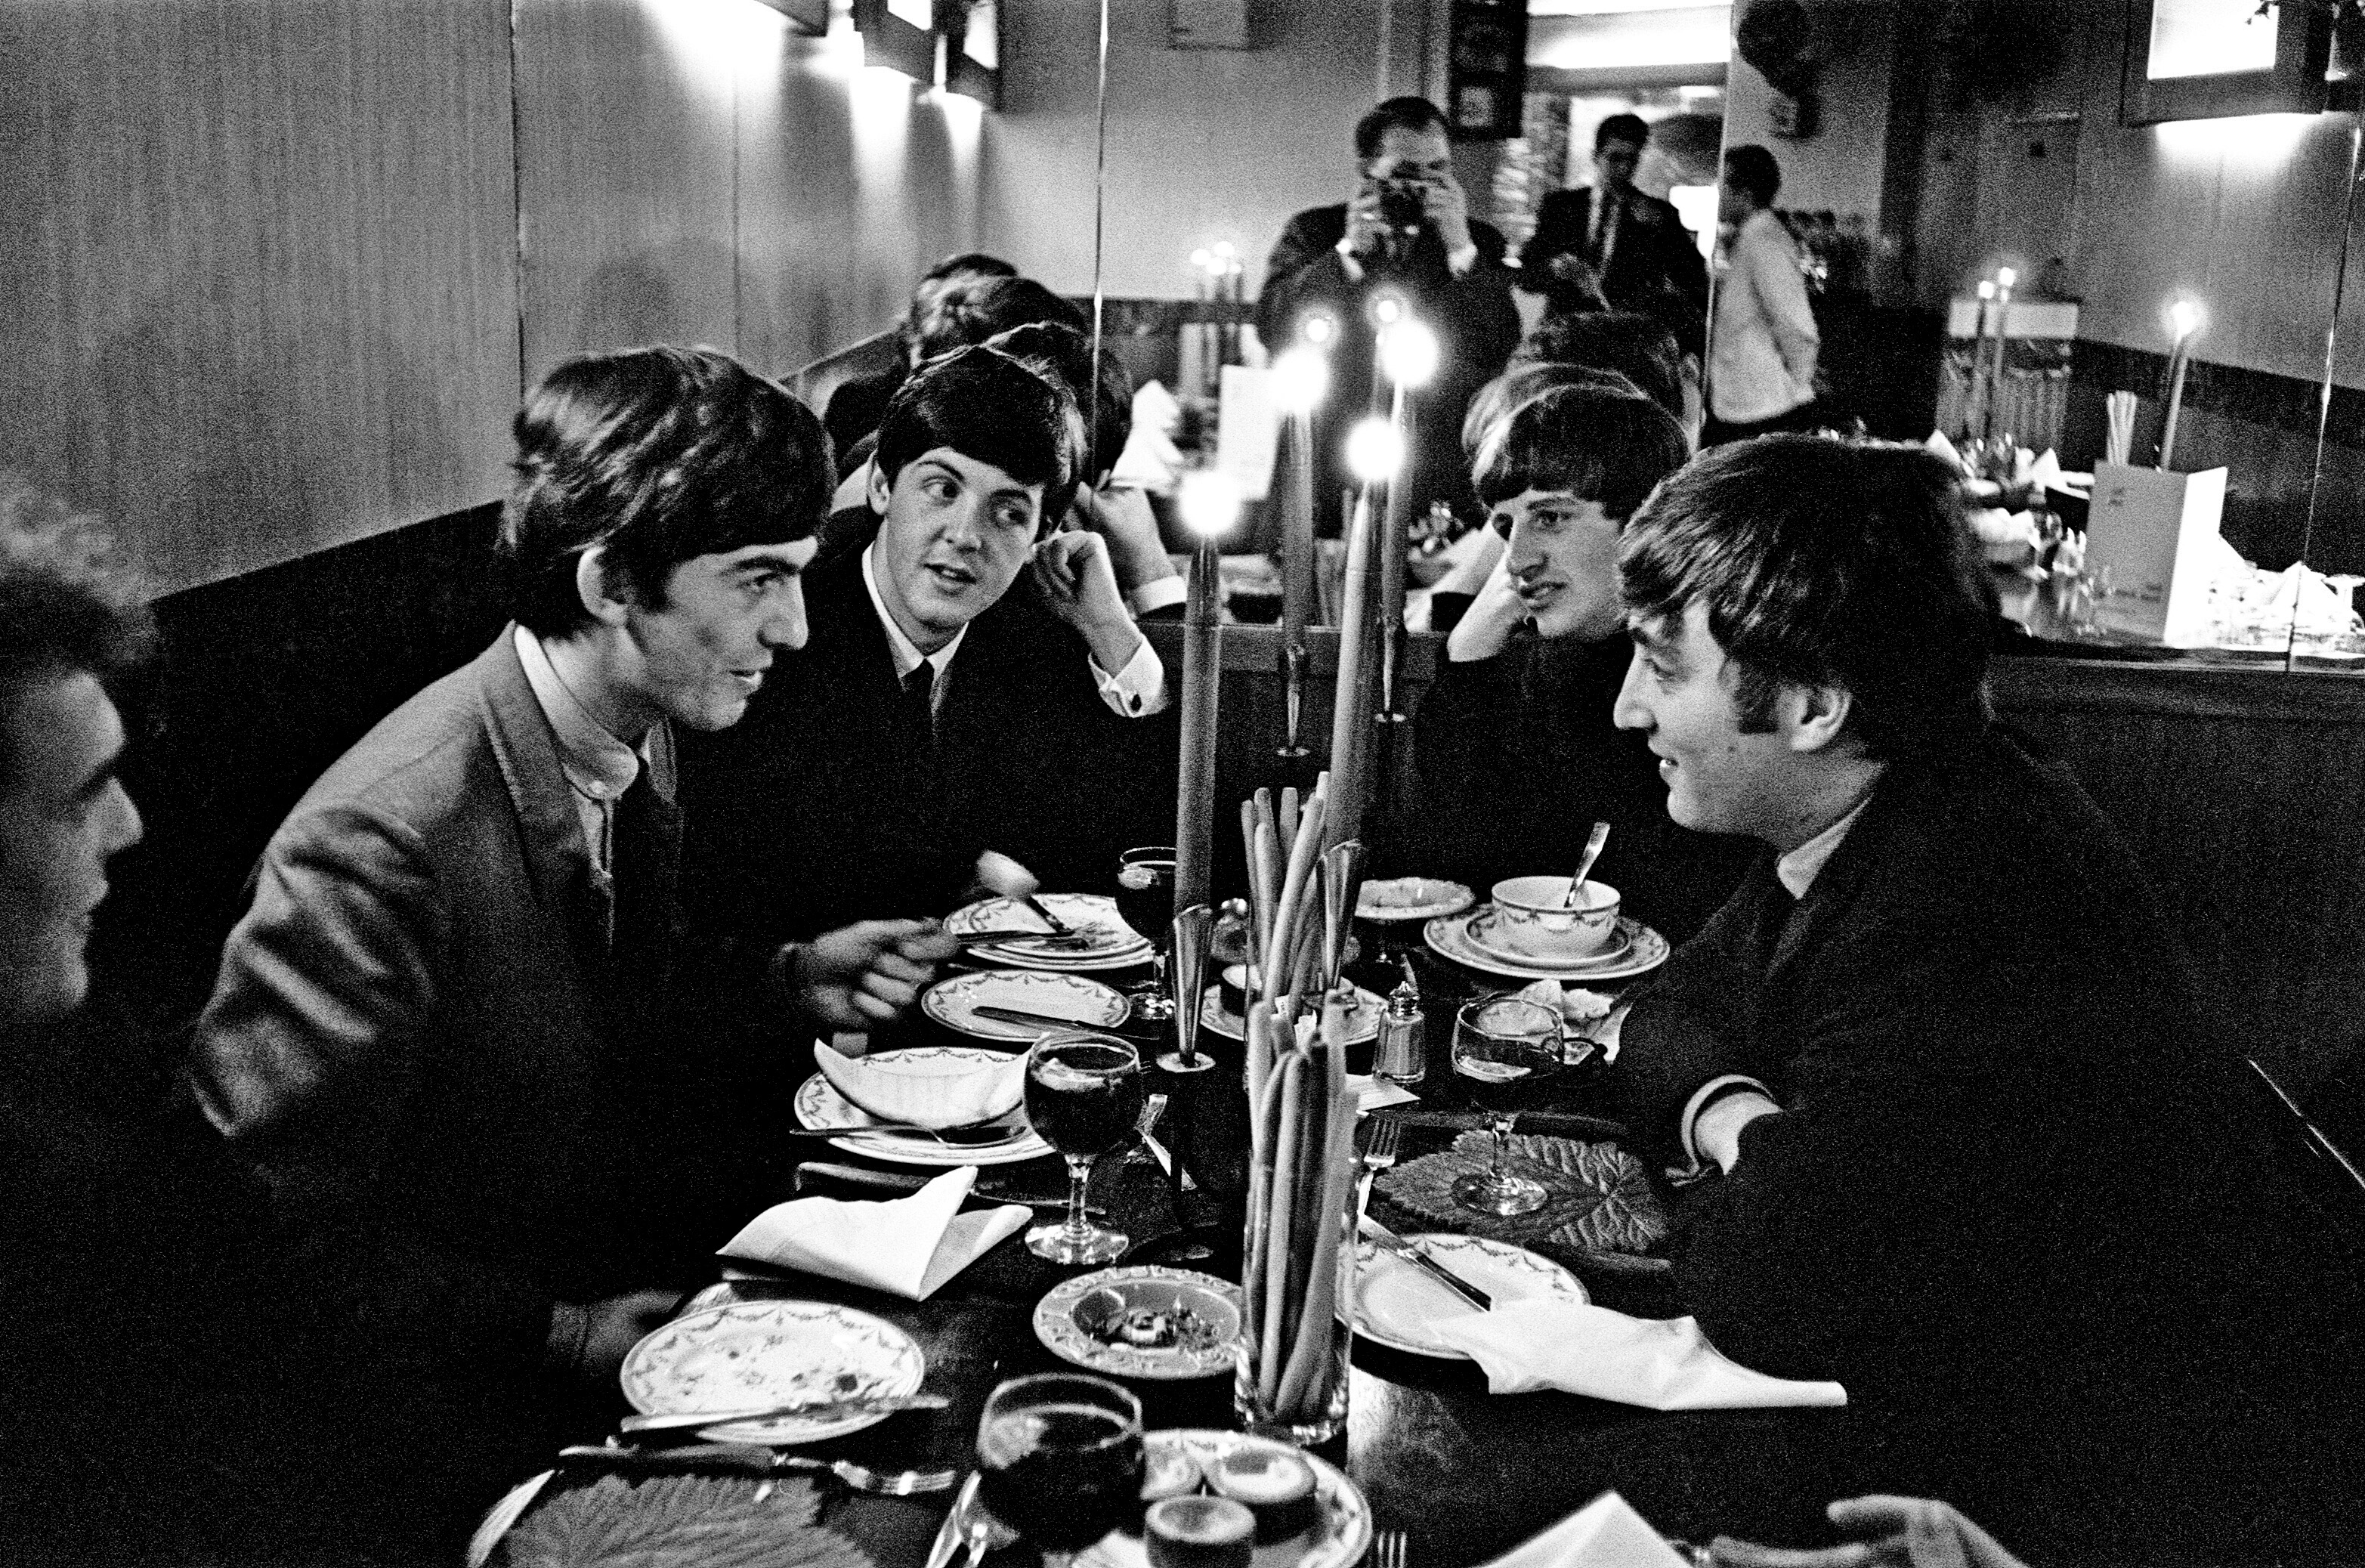 The Beatles' George Harrison, Paul McCartney, Ringo Starr, and John Lennon at a table during the "Yesterday" era